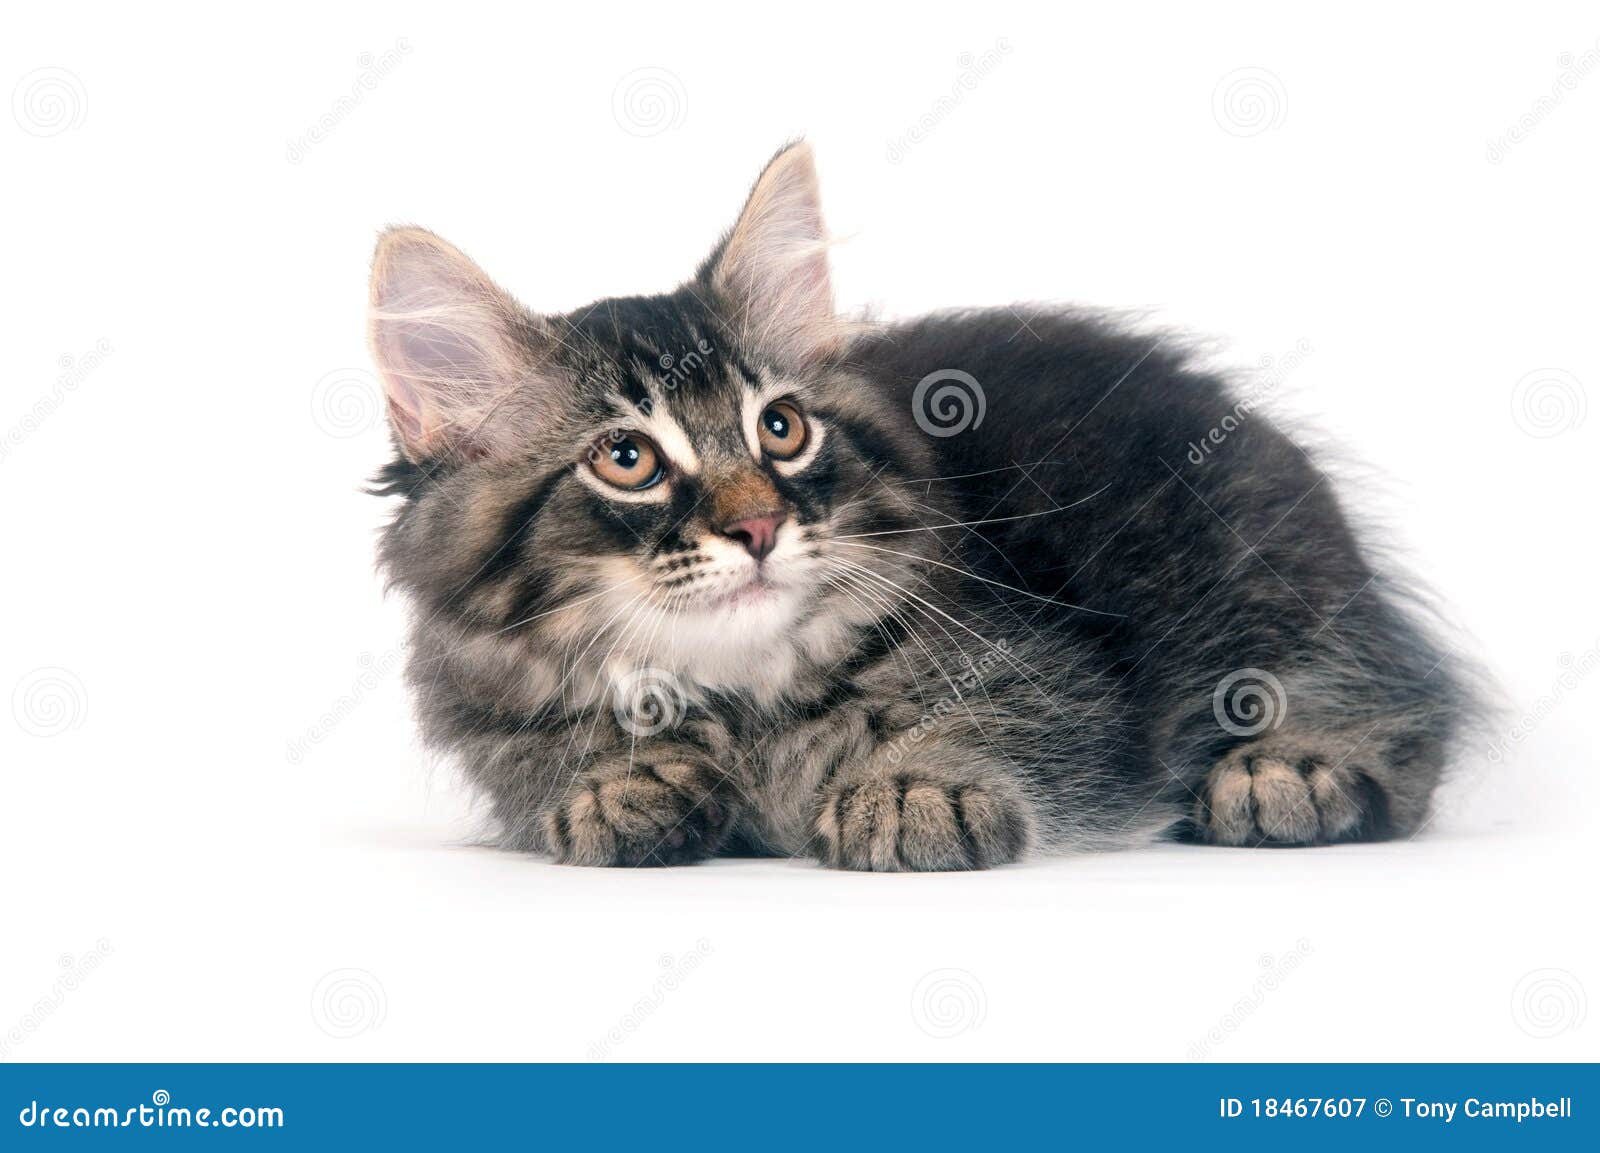  Cute  Kitten  Laying  Down  On White Background Stock Image 